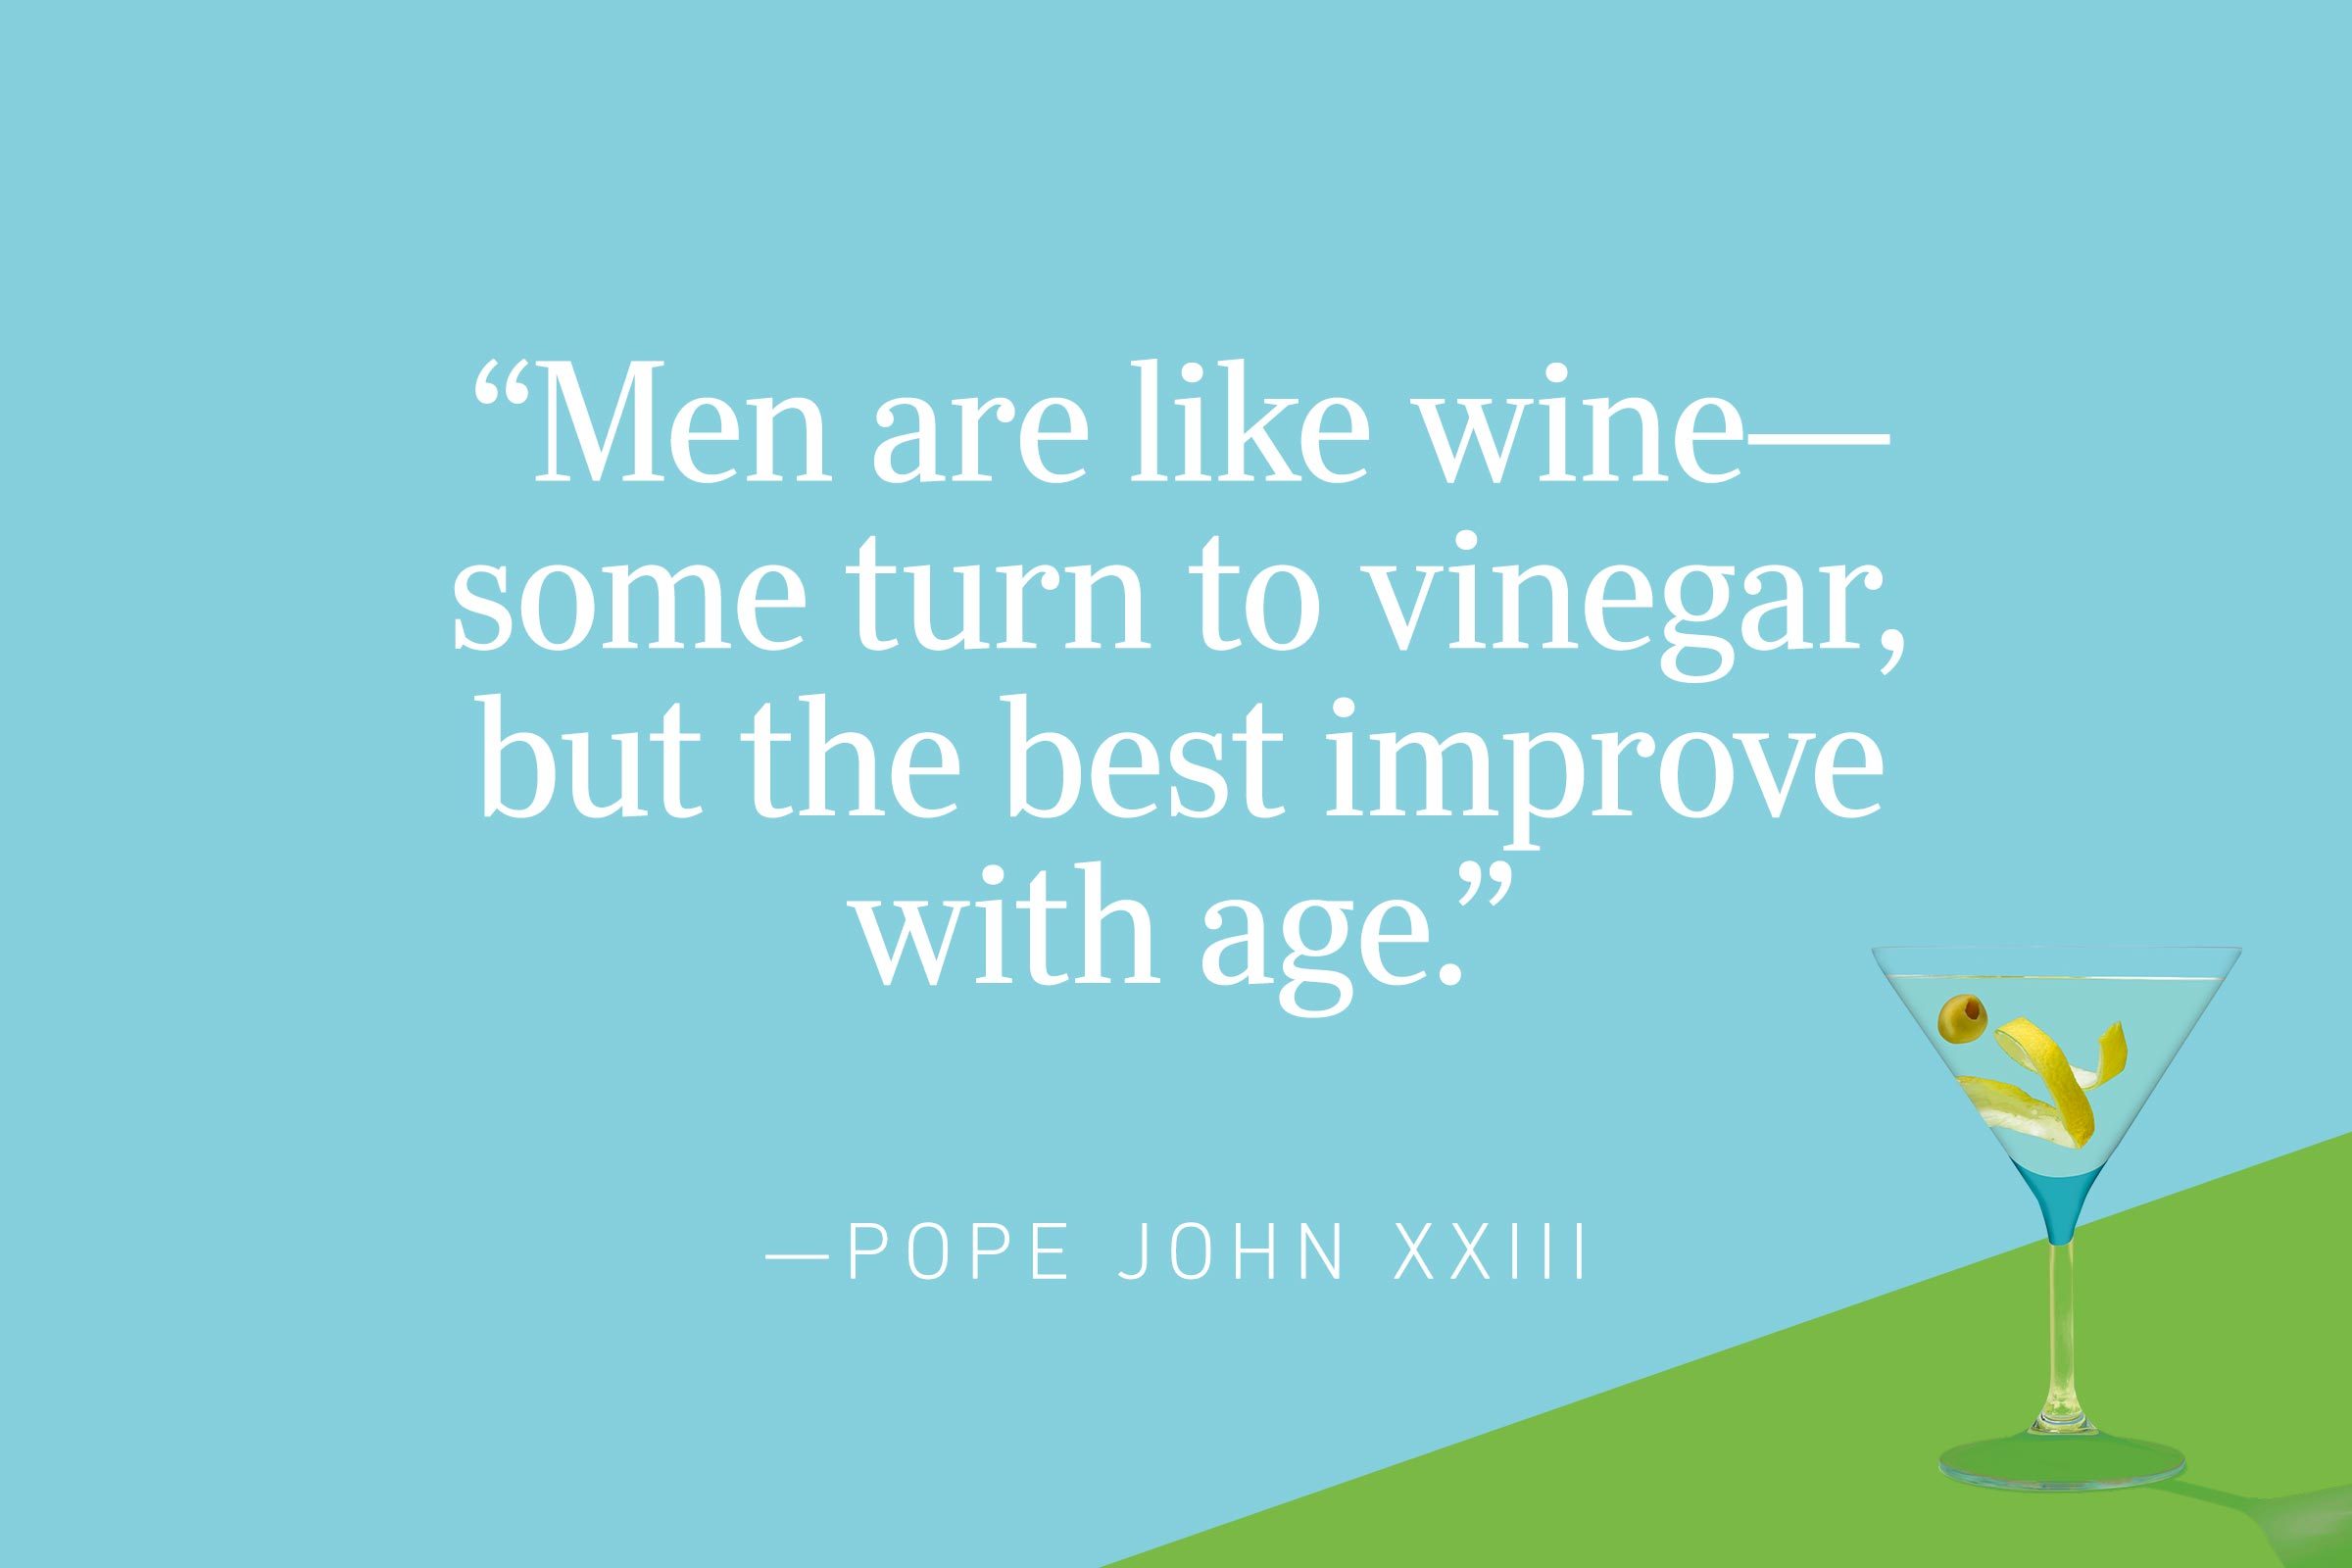 "Men are like wine—some turn to vinegar, but the best improve with age." —Pope John XXIII